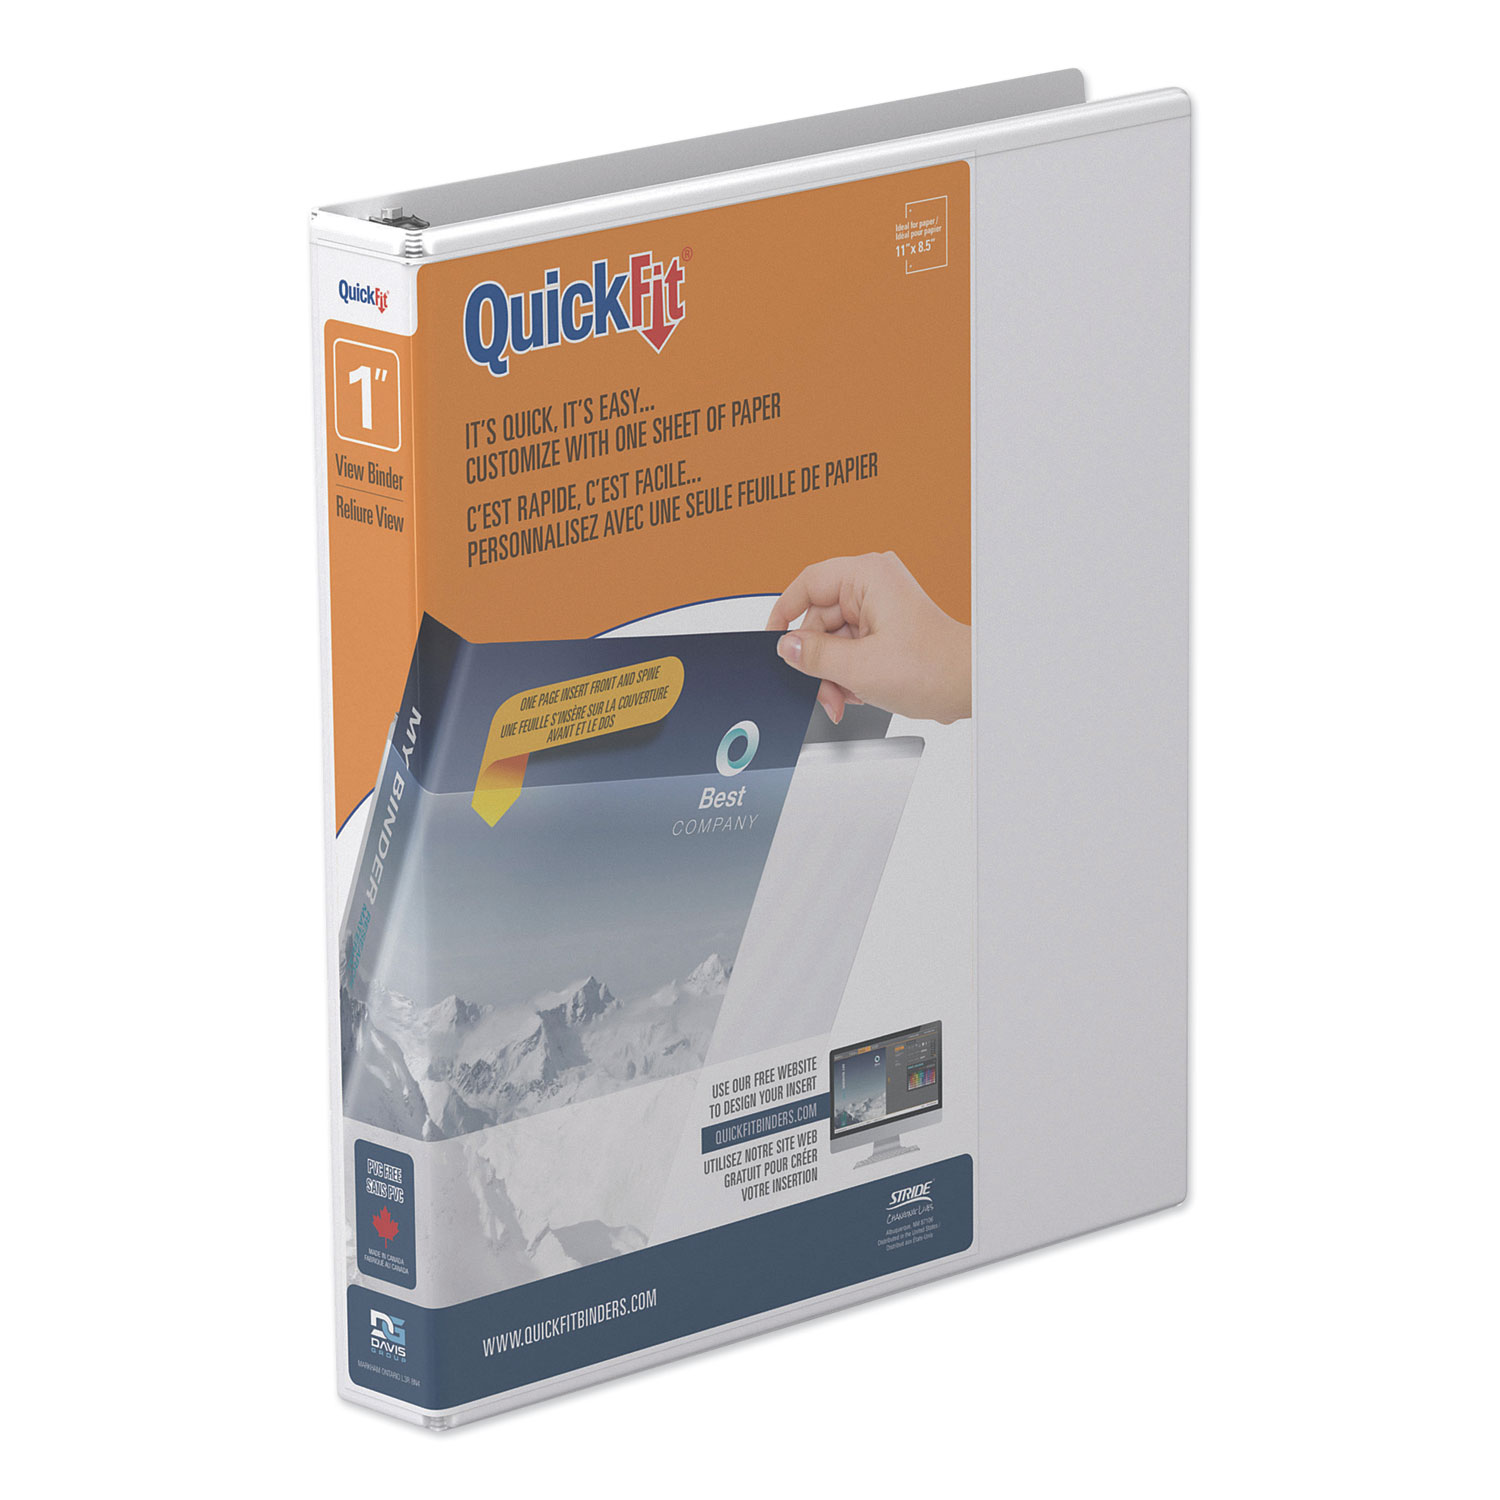  Stride 87010 QuickFit D-Ring View Binder, 3 Rings, 1 Capacity, 11 x 8.5, White (STW87010) 